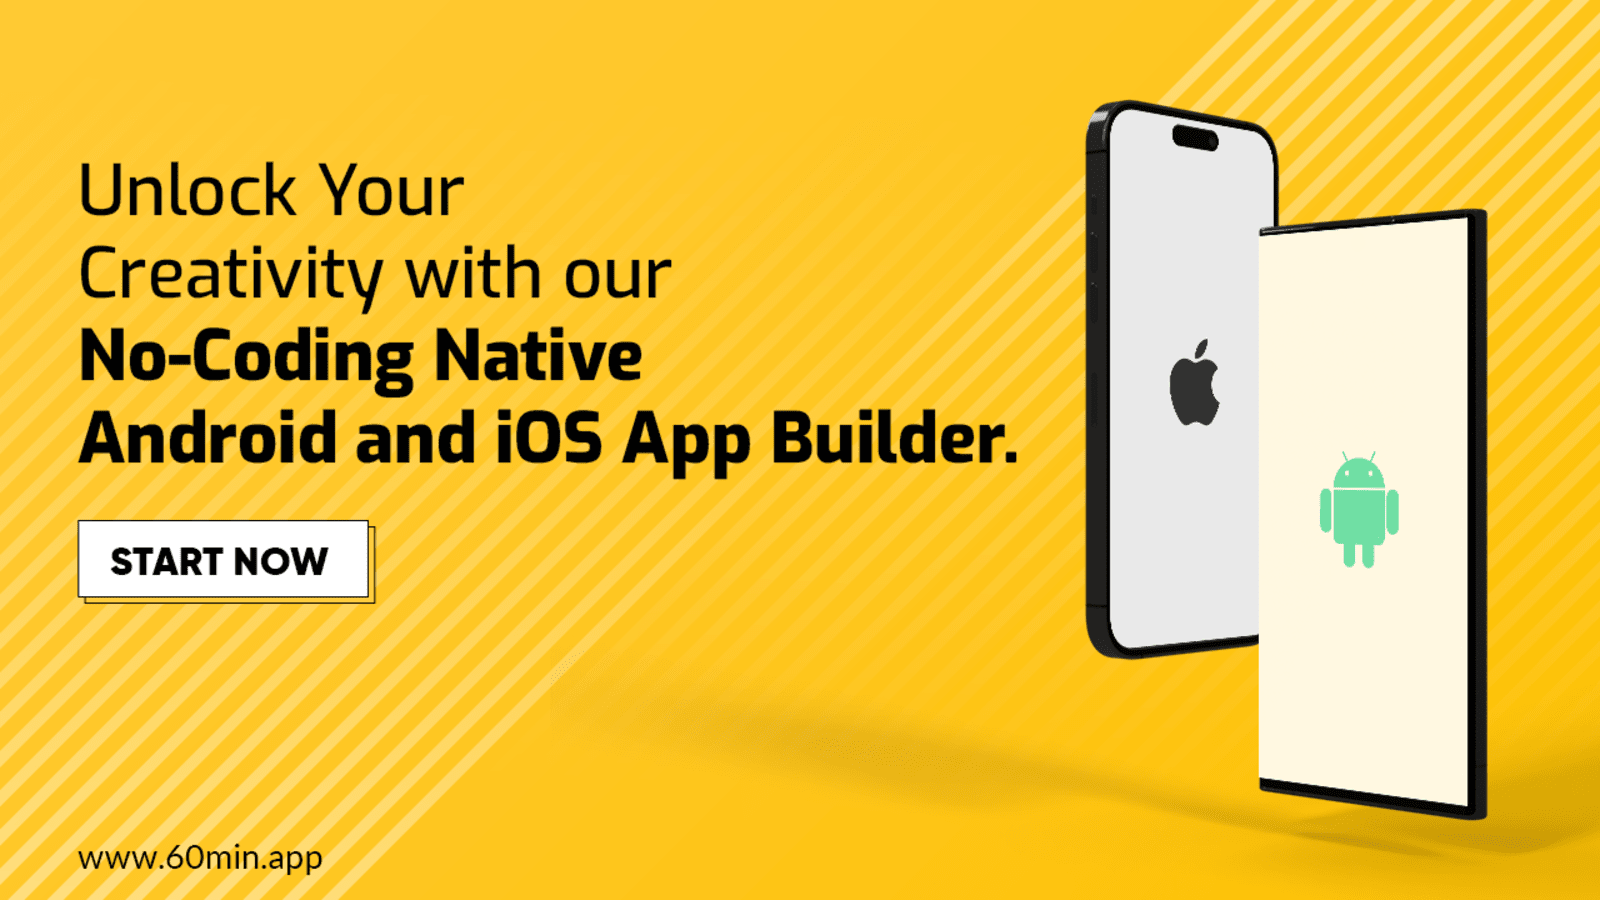 no-coding native Android and iOS app builder